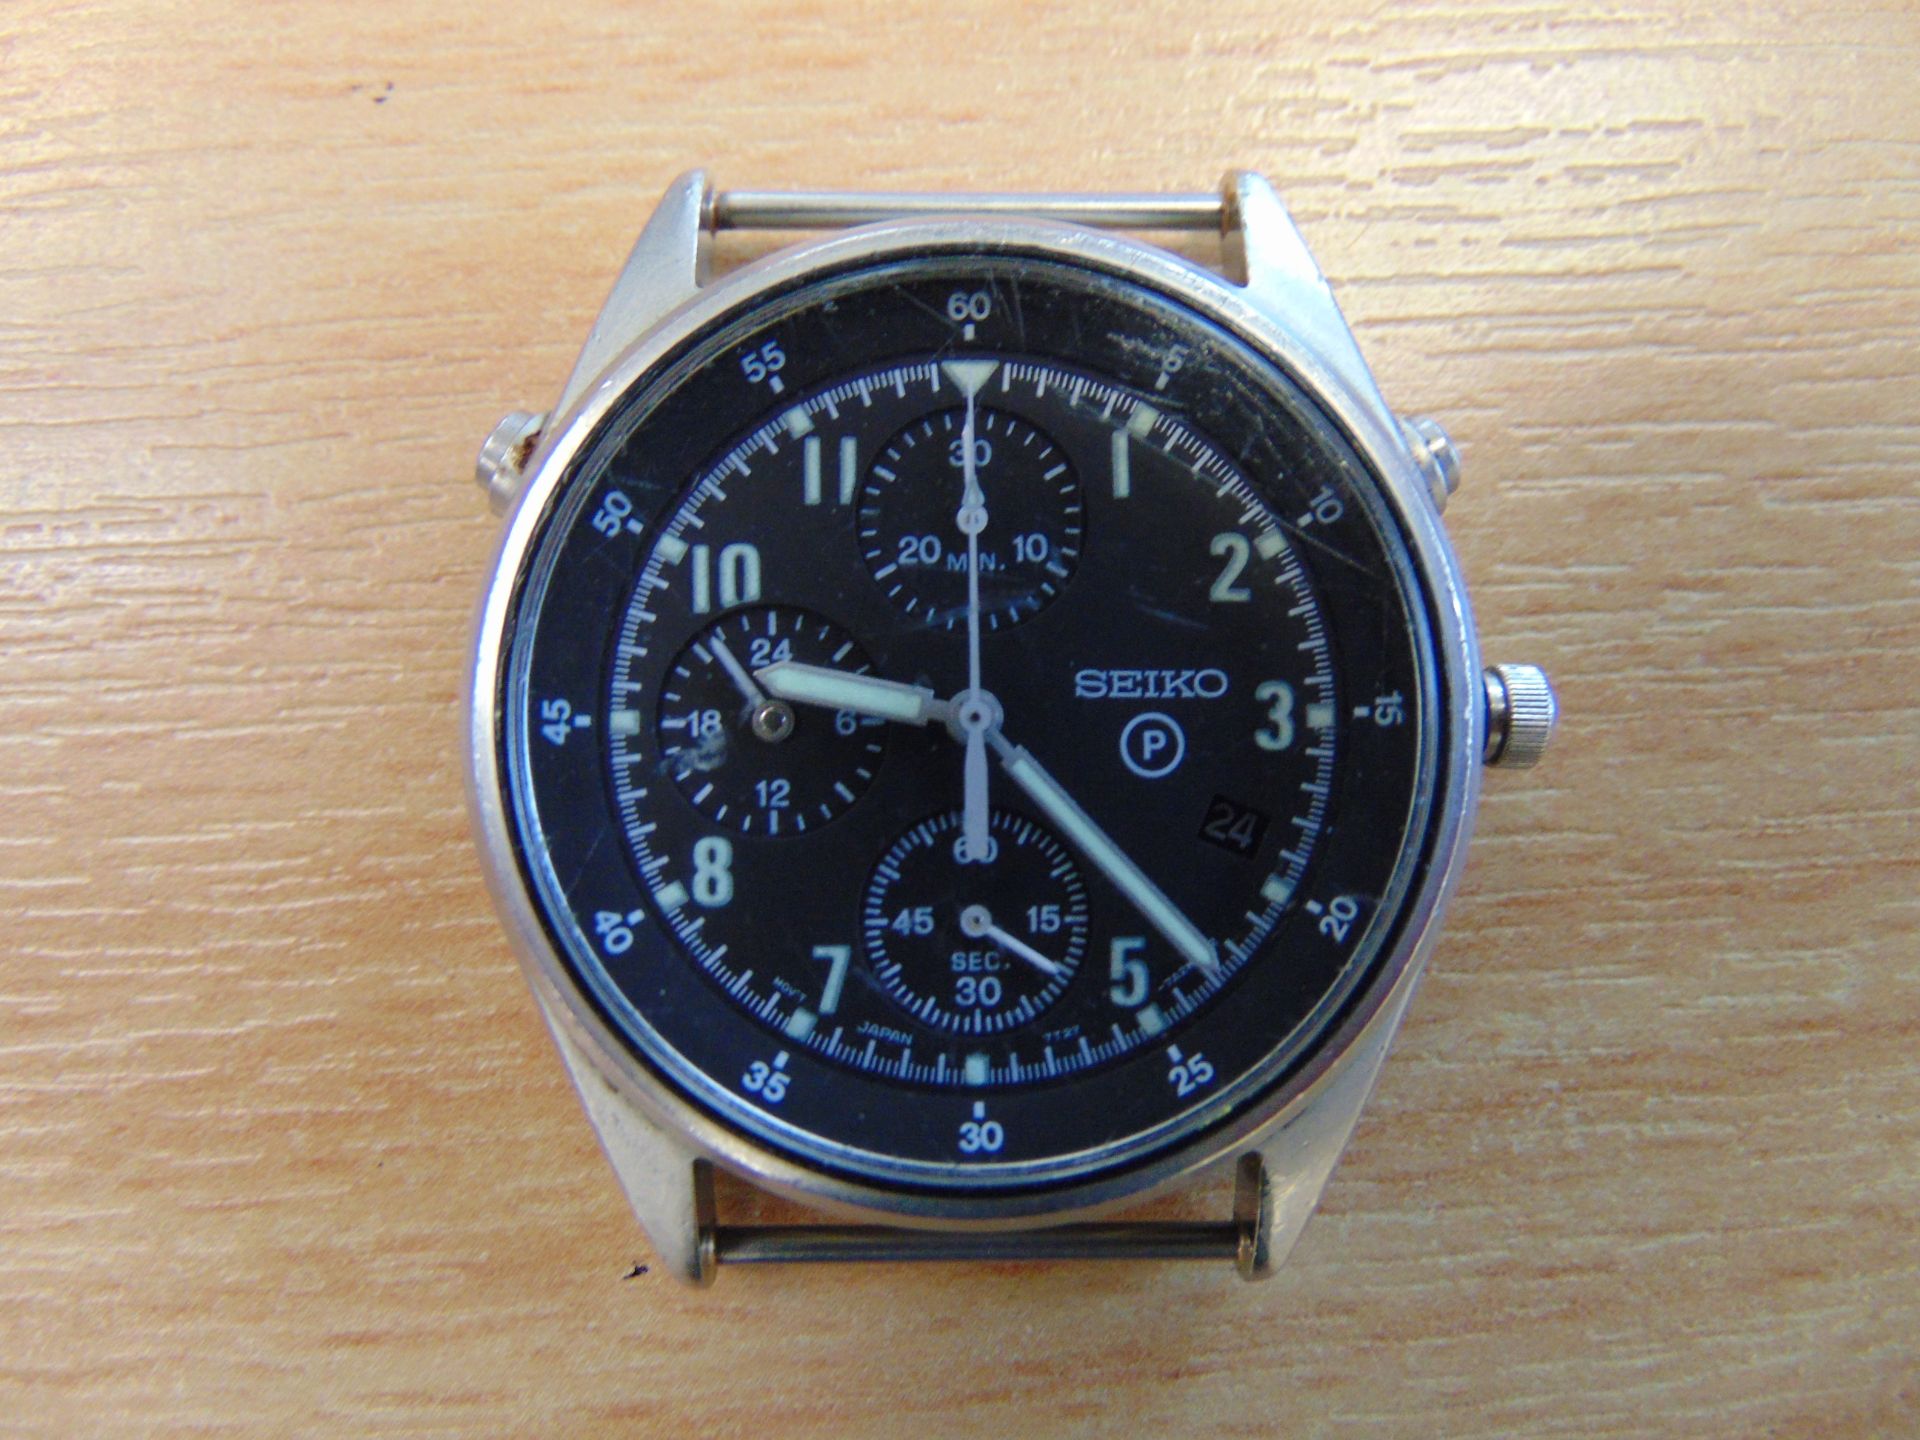 Seiko Gen 2 Pilots Chrono with Date, RAF Tornado Force Issue, Nato Marks, Date 1995 - Image 3 of 6